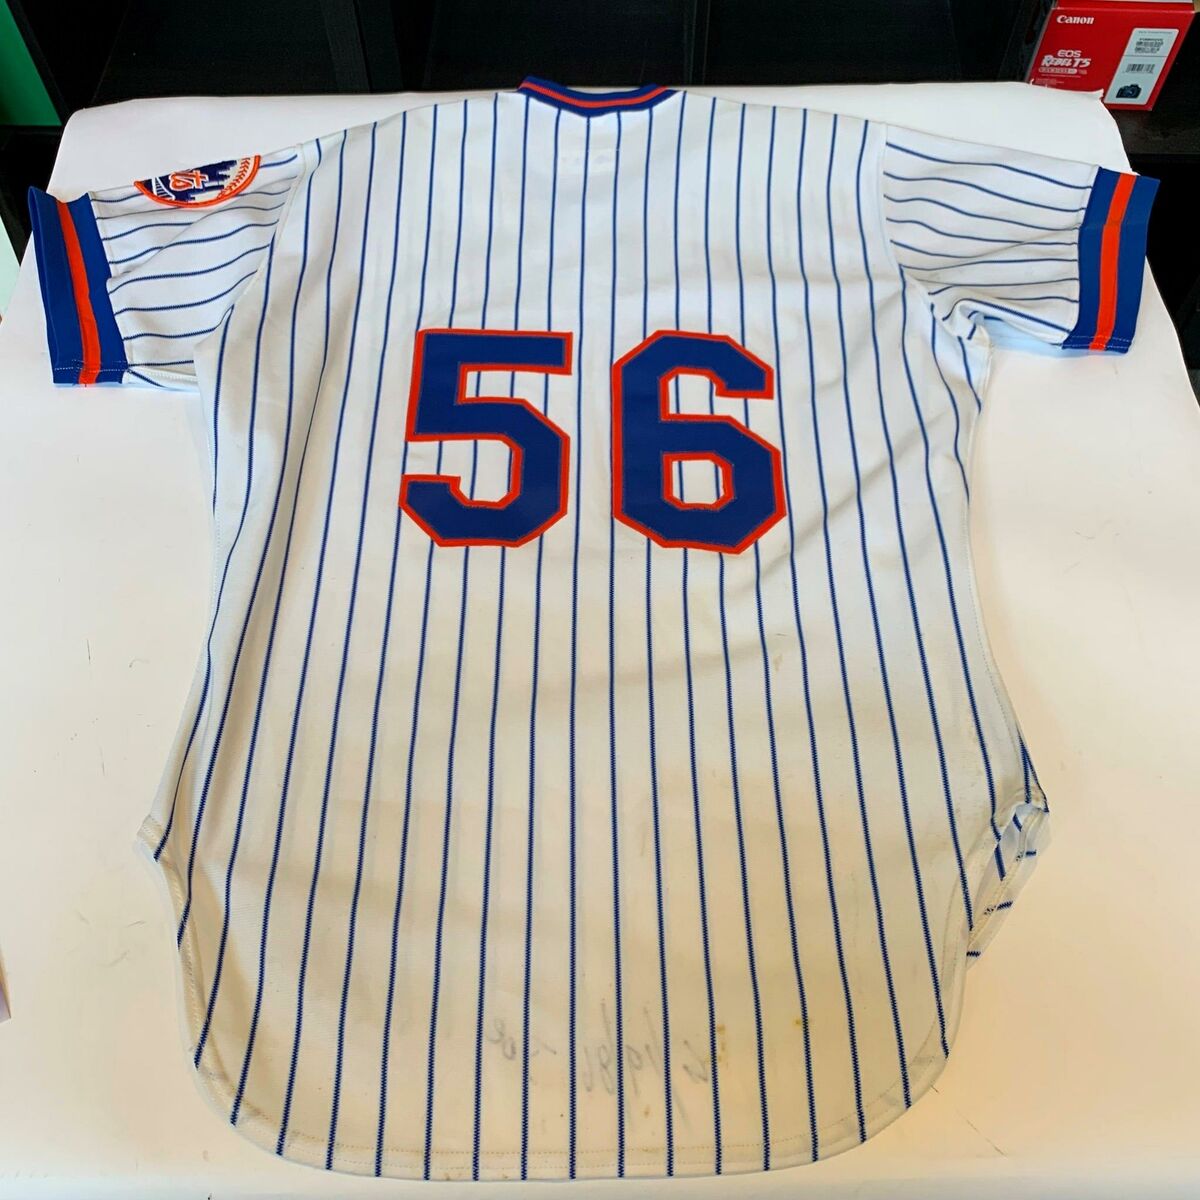 Rare Tom Seaver Signed 1982 New York Mets Game Used Jersey With JSA COA